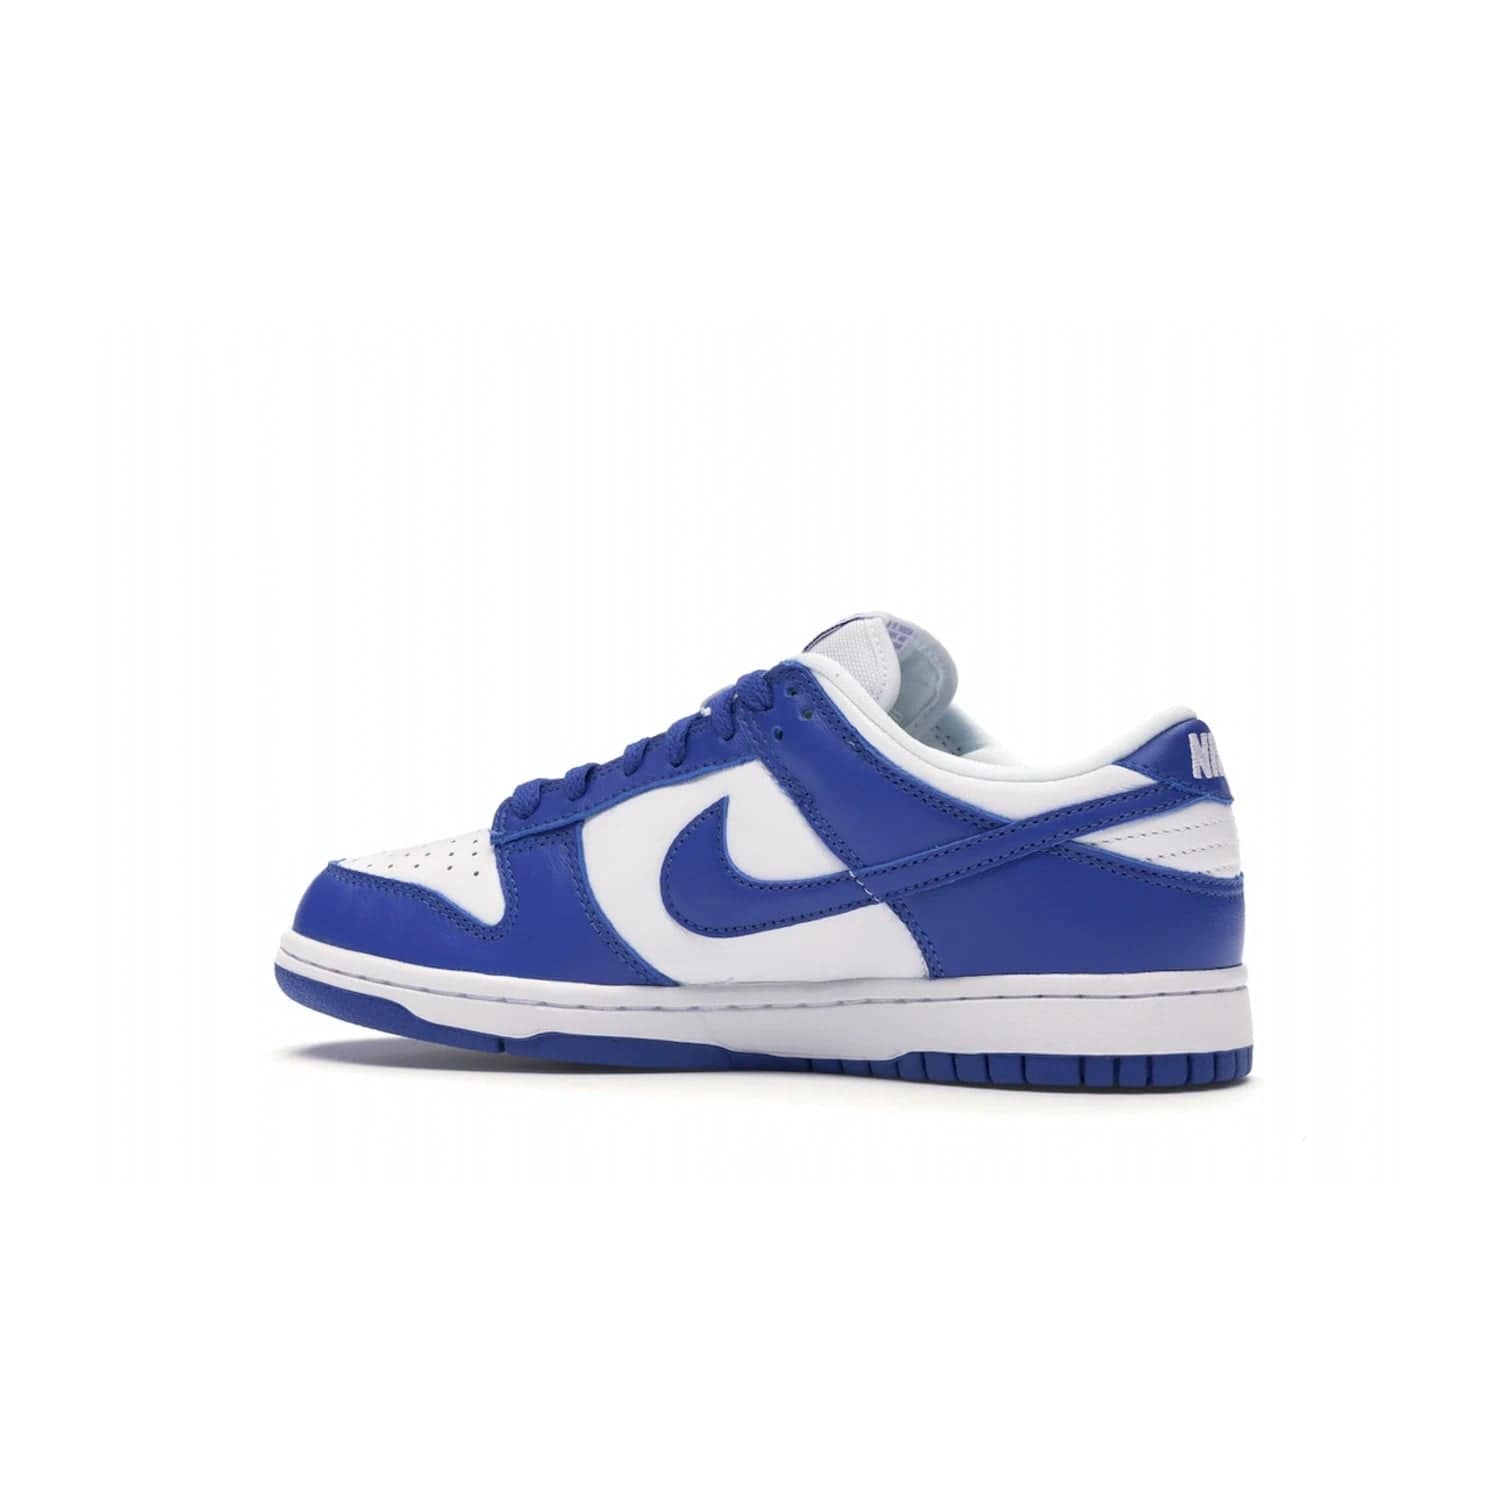 Nike Dunk Low SP Kentucky (2020/2022) - Image 21 - Only at www.BallersClubKickz.com - Classic Nike Dunk Low SP Kentucky with timeless White/Varsity Royal colorway. White leather upper, royal outsole, and Nike branding. A hit since March 2020 homage to the 1985 Nike College Colors program. Show your support with these classic kicks.